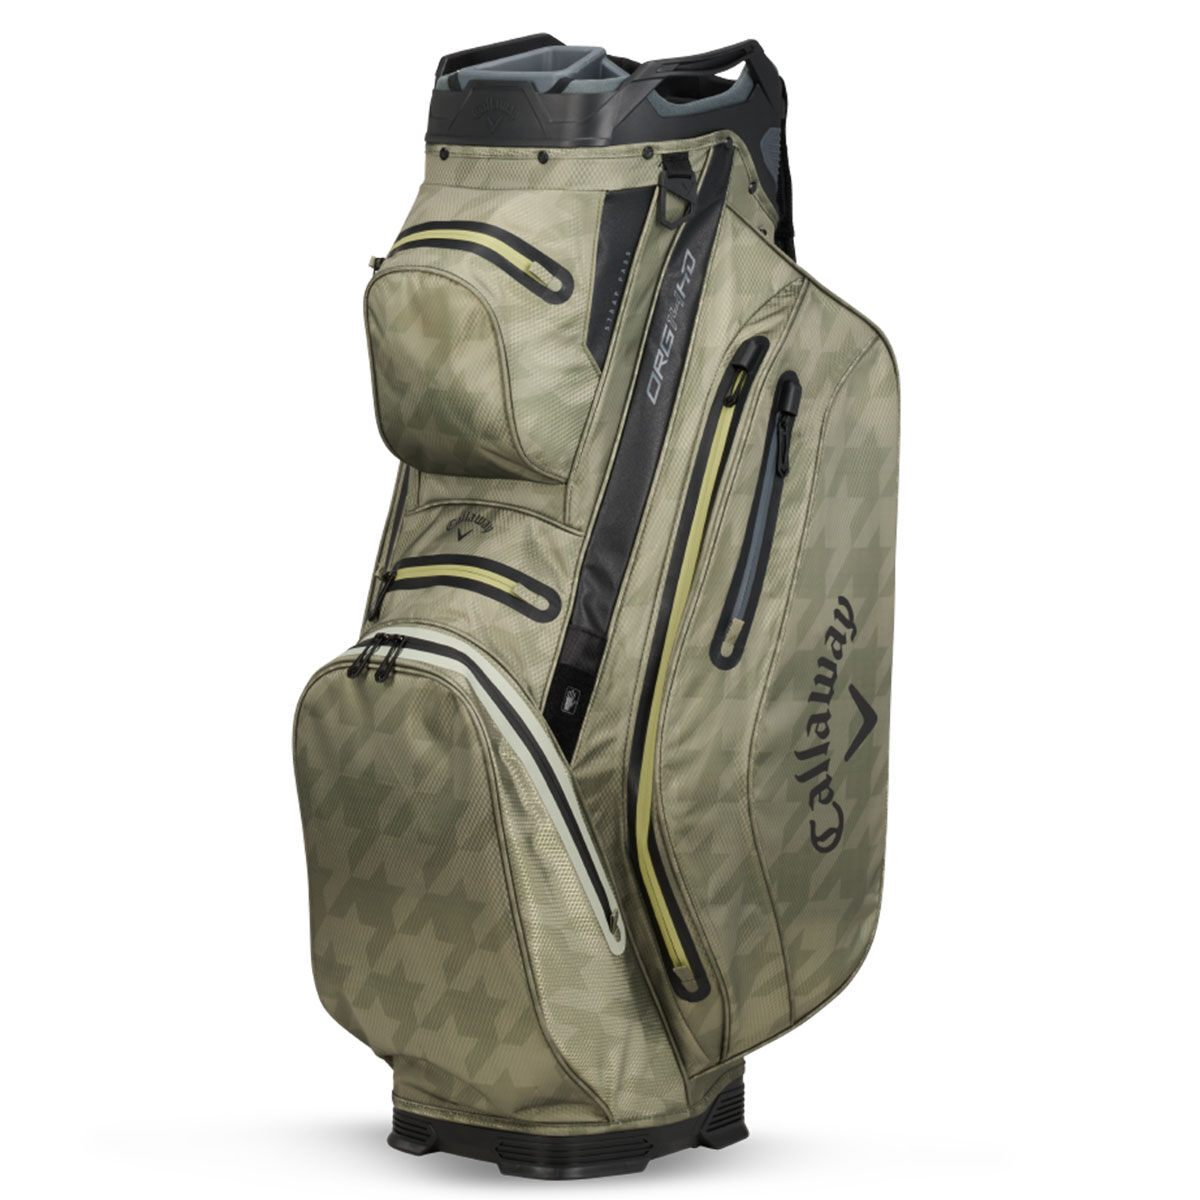 Callaway Org 14 HD Golf Cart Bag, Olive/houndstooth, One Size | American Golf